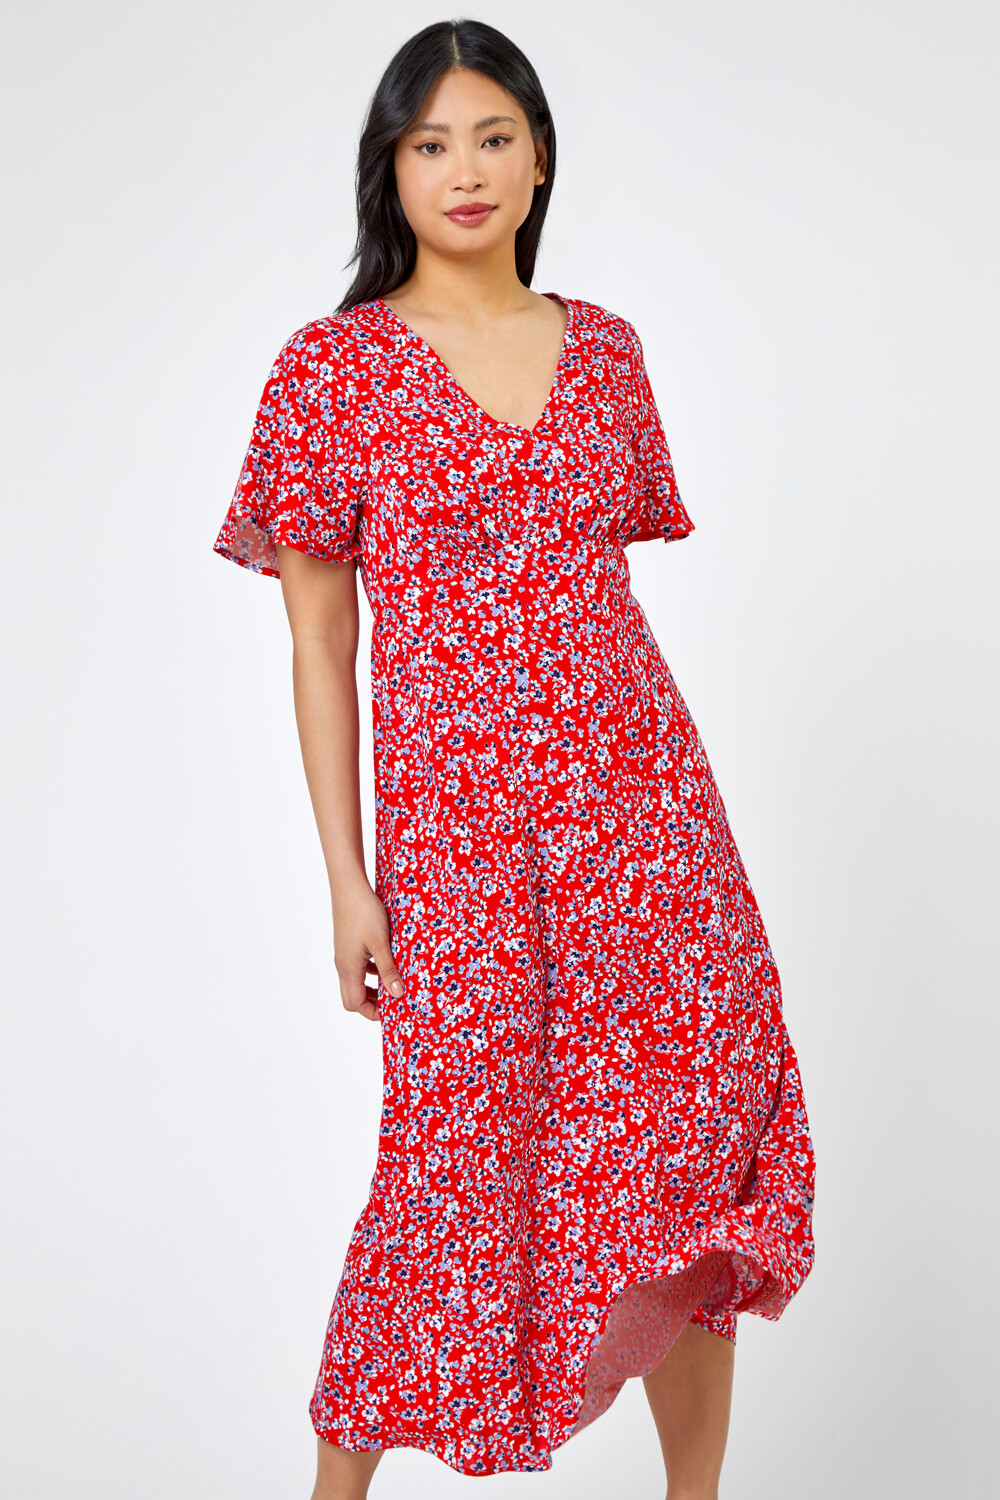 Red Petite Floral Print Flute Sleeve Dress, Image 3 of 5